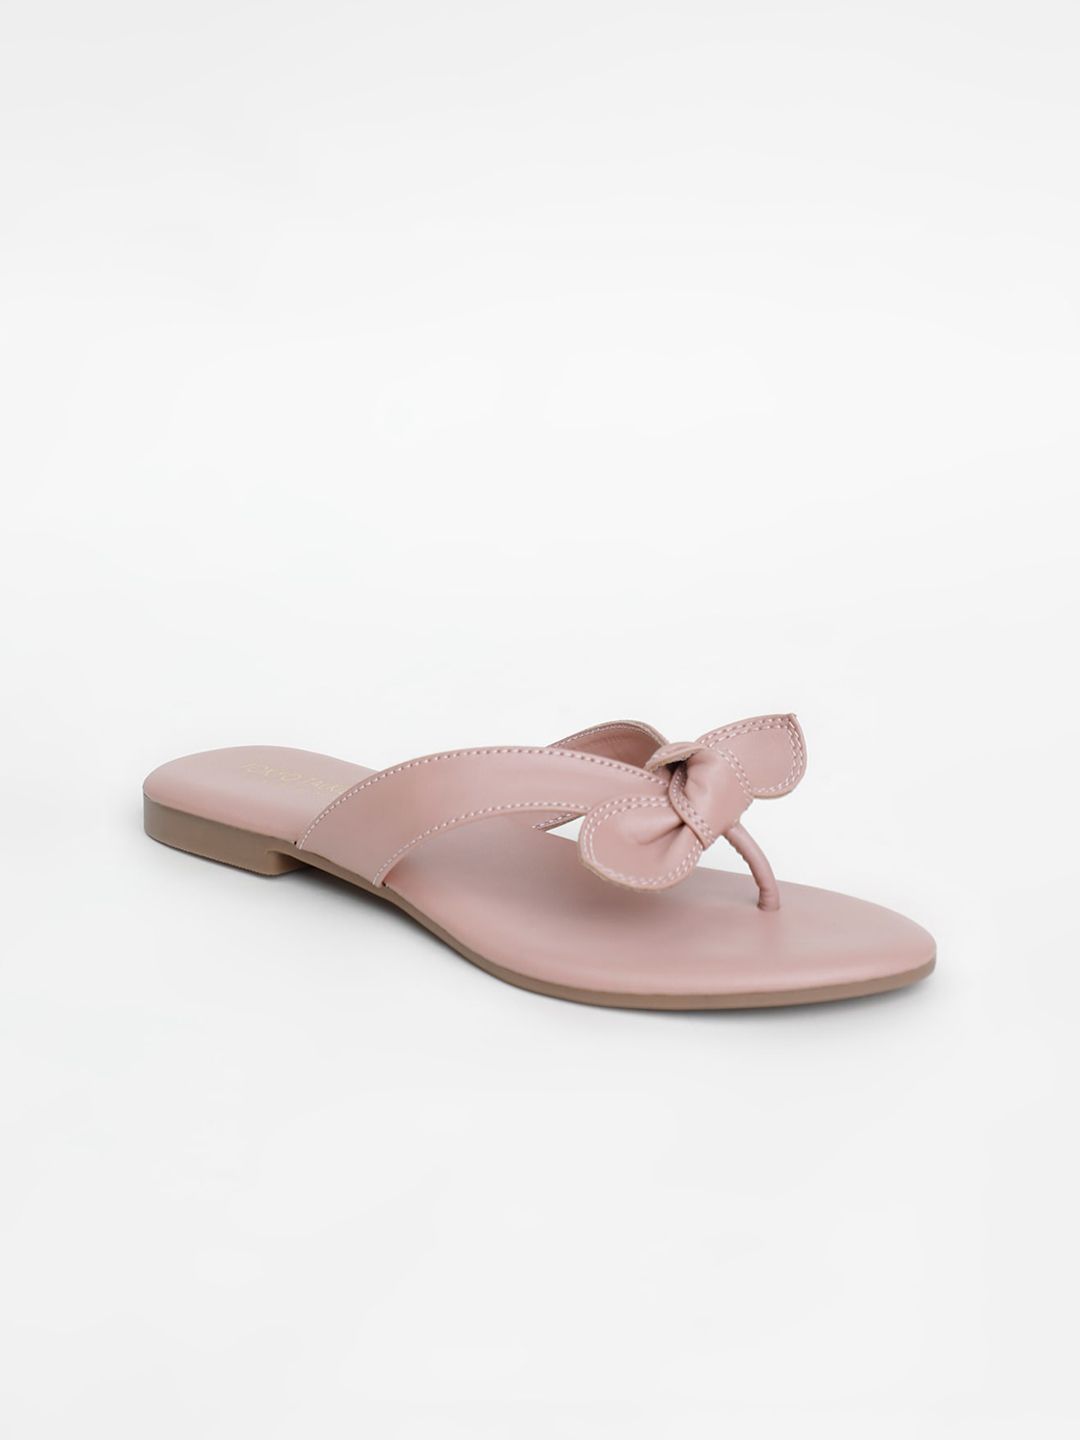 Tokyo Talkies Women Pink Solid Open Toe Flats with Bows Price in India